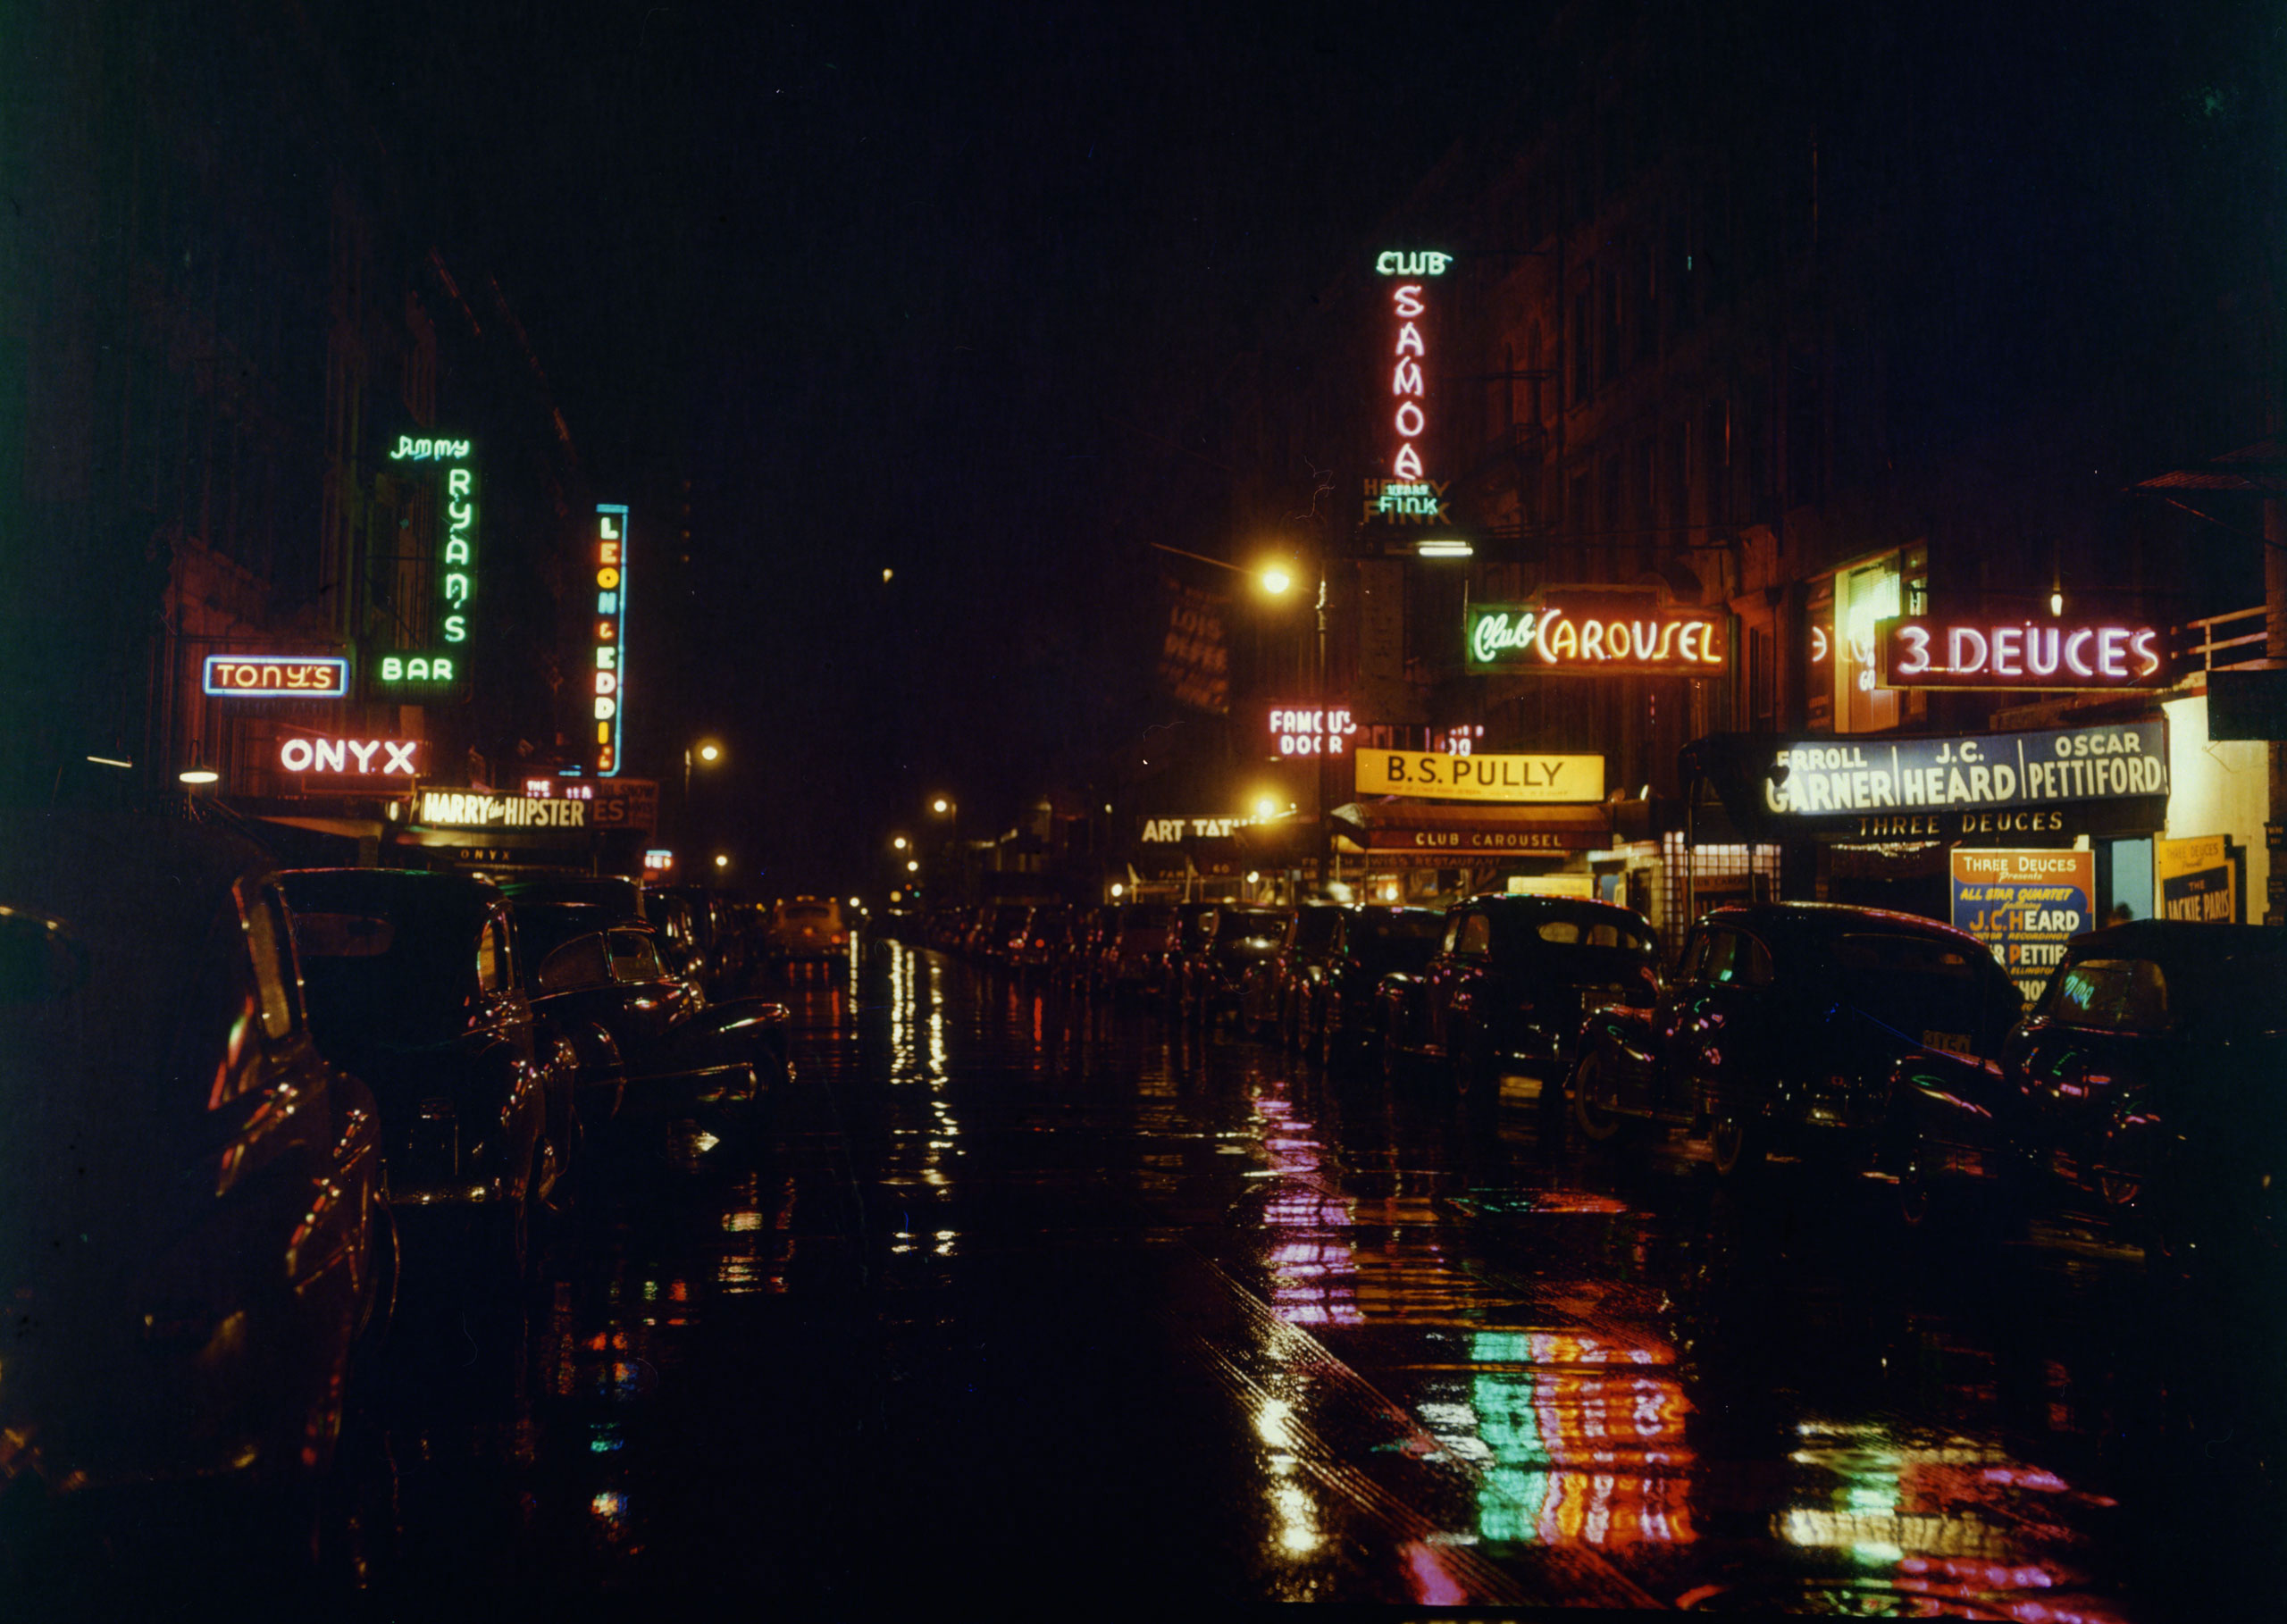 Road at nighttime, with neon signs reflecting on the wet pavement, and parked cars on either side of the street